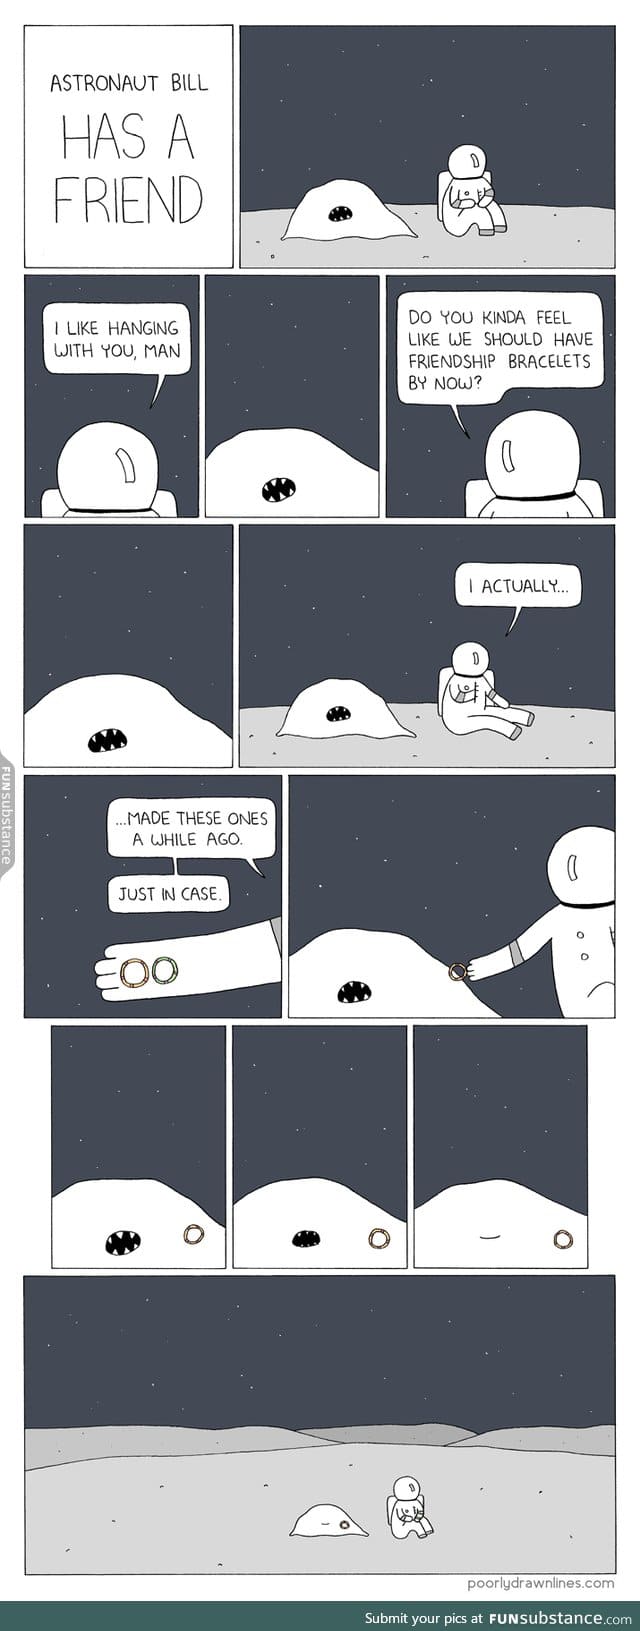 Making friends on the moon